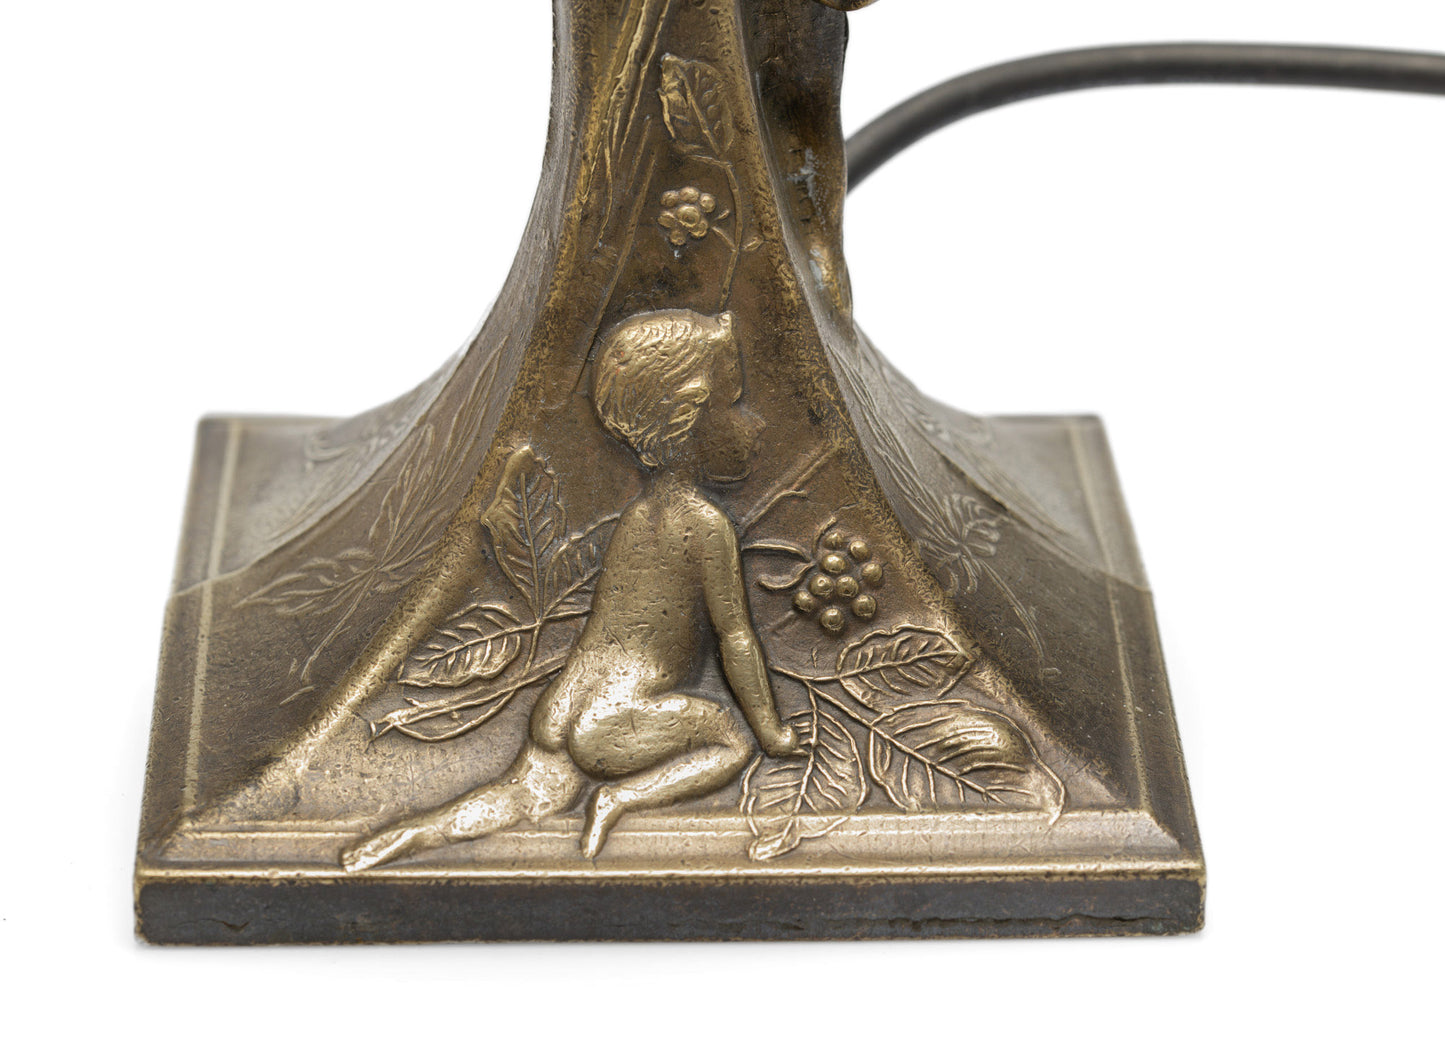 Art Deco Transitional Bronze Figural Table Lamp with Maiden & Children at Play (Code 2564)